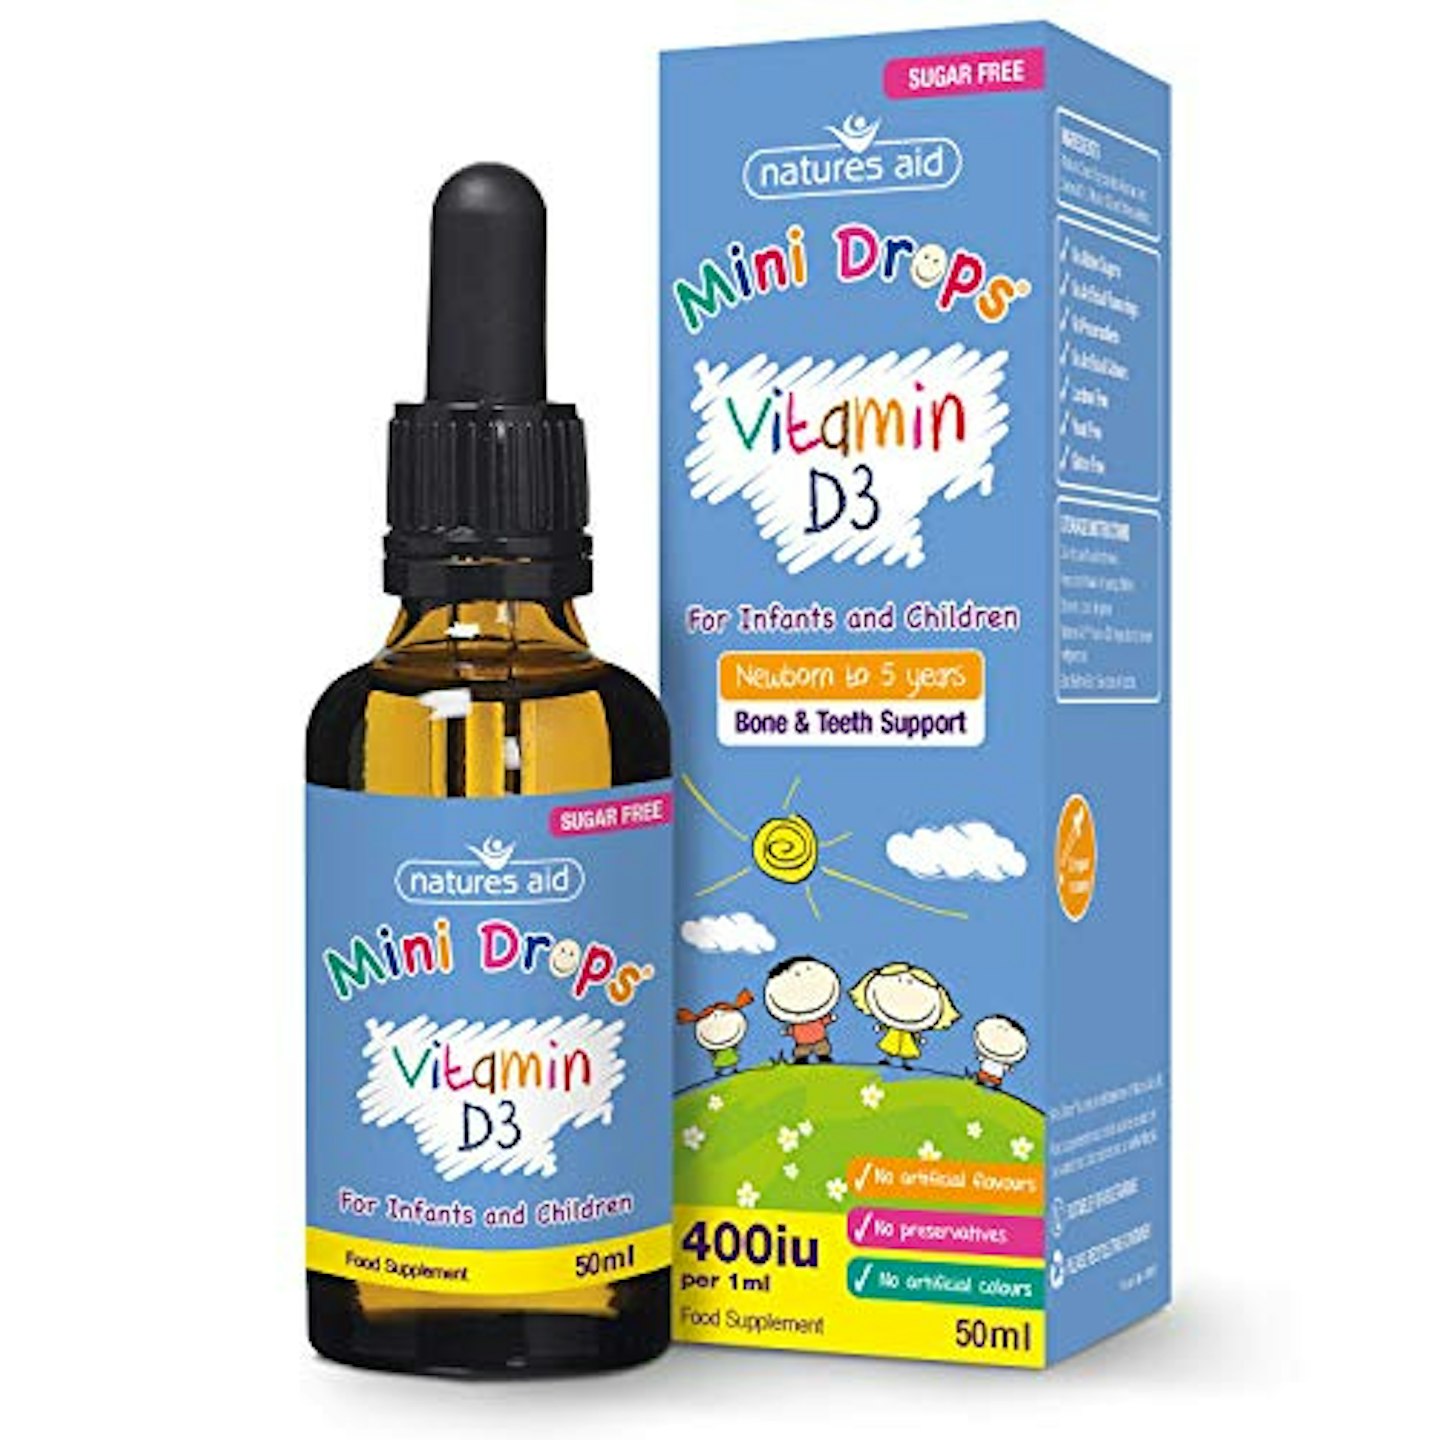 Natures Aid Vitamin D3 Mini Drops for Infants and Children 50ml